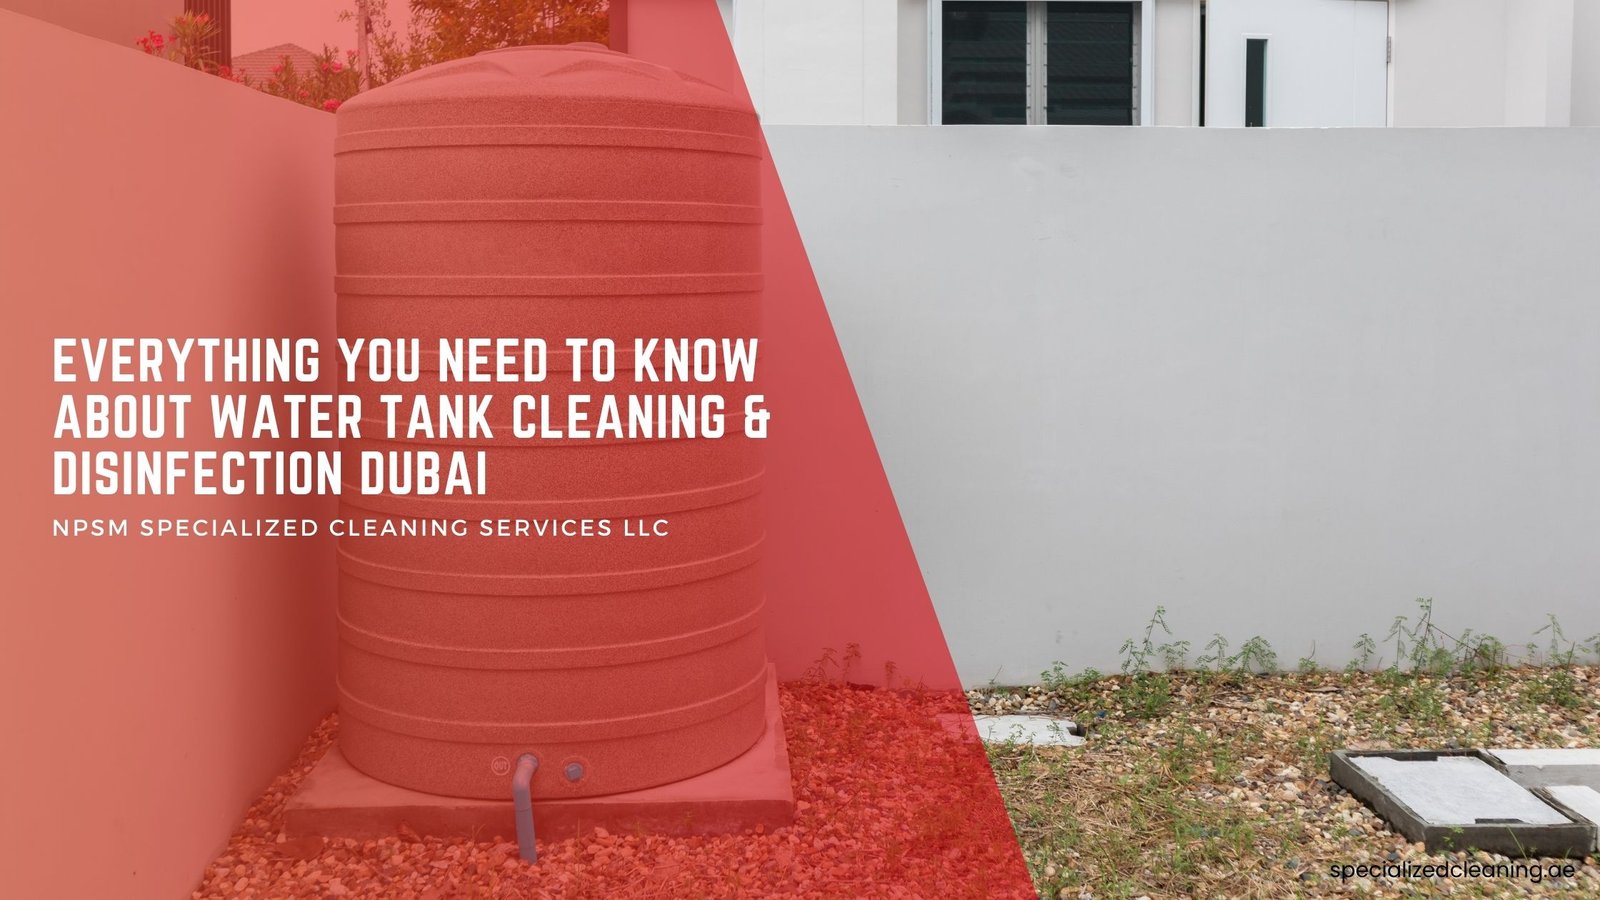 Benefits of water tank cleaning in dubai | NPSM Water tank Cleaning